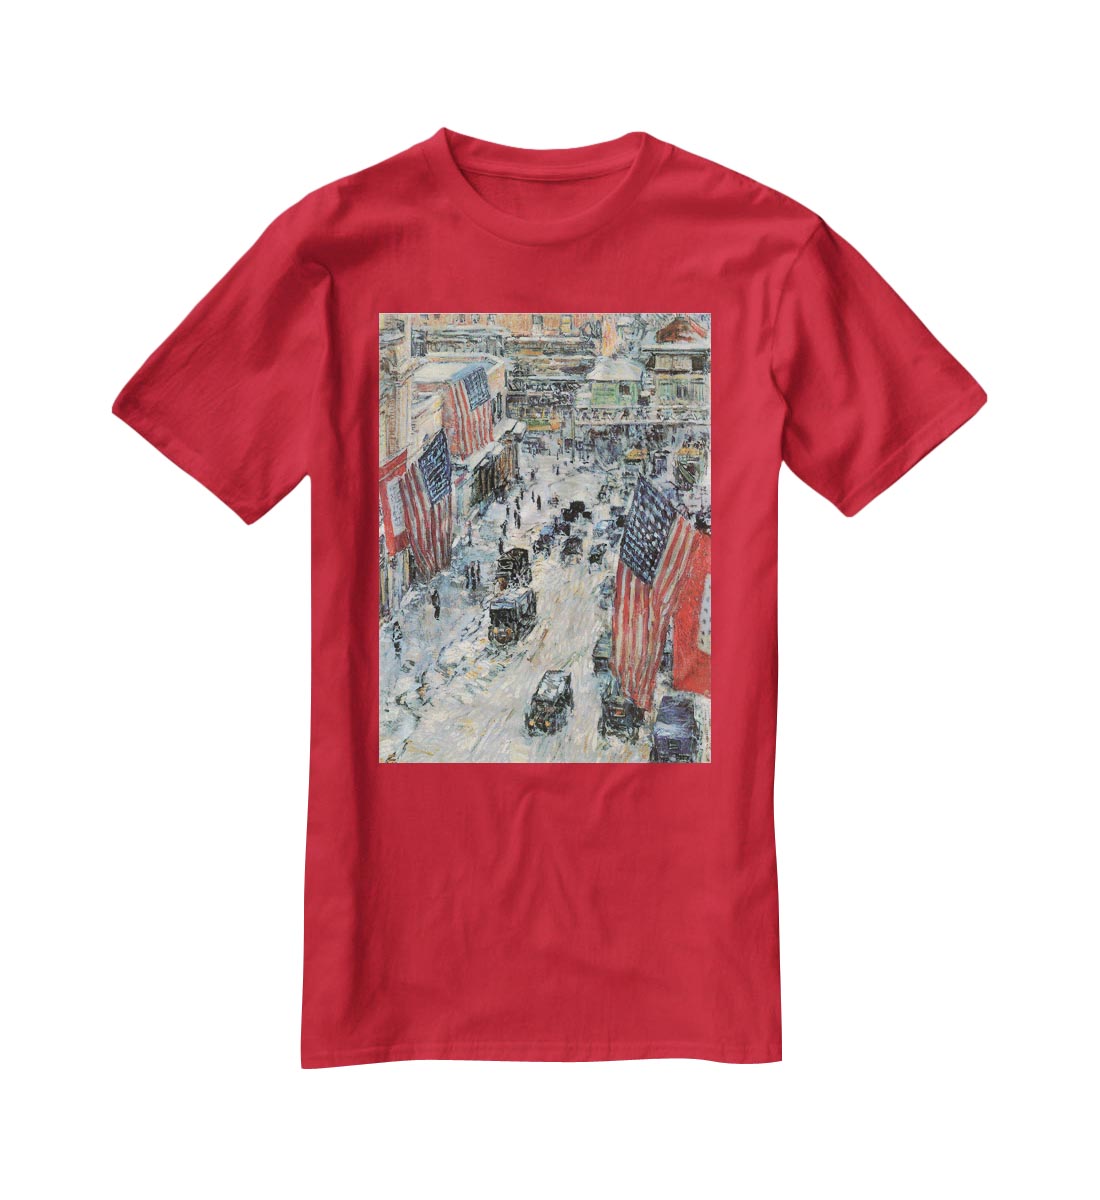 Flags on Fifth Avenue Winter 1918 by Hassam T-Shirt - Canvas Art Rocks - 4